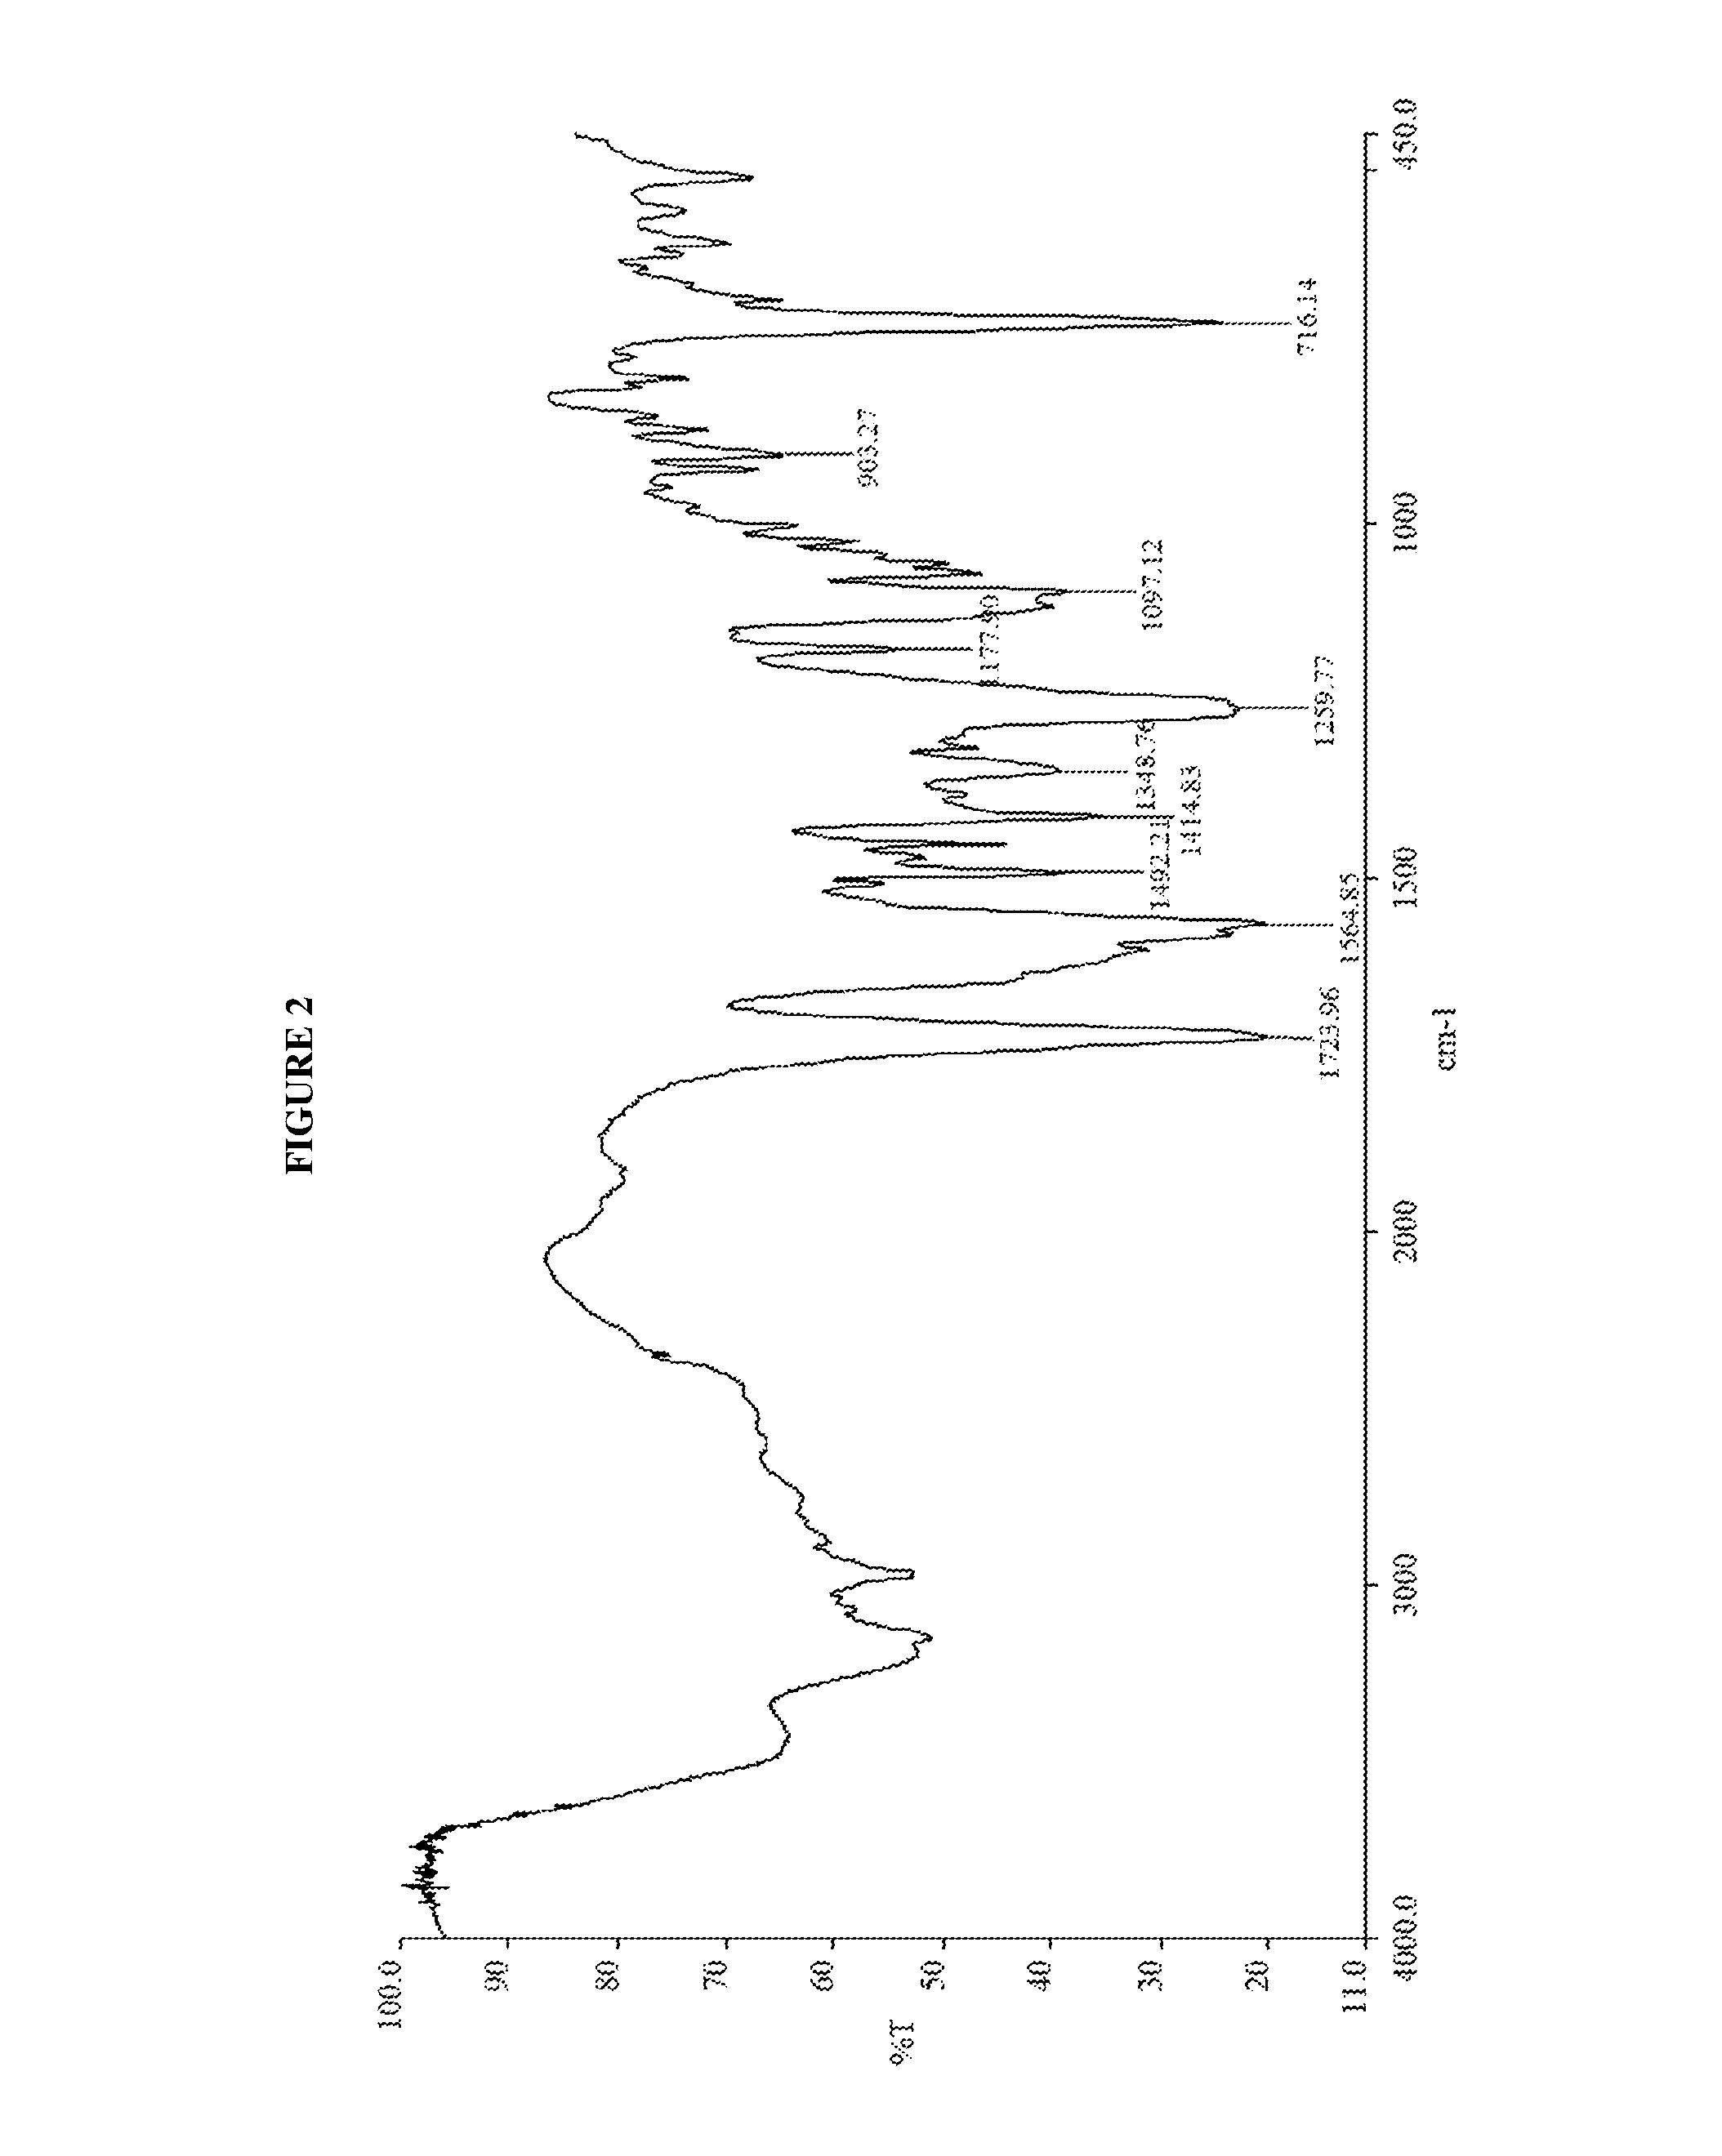 Efficient method for the preparation of tofacitinib citrate